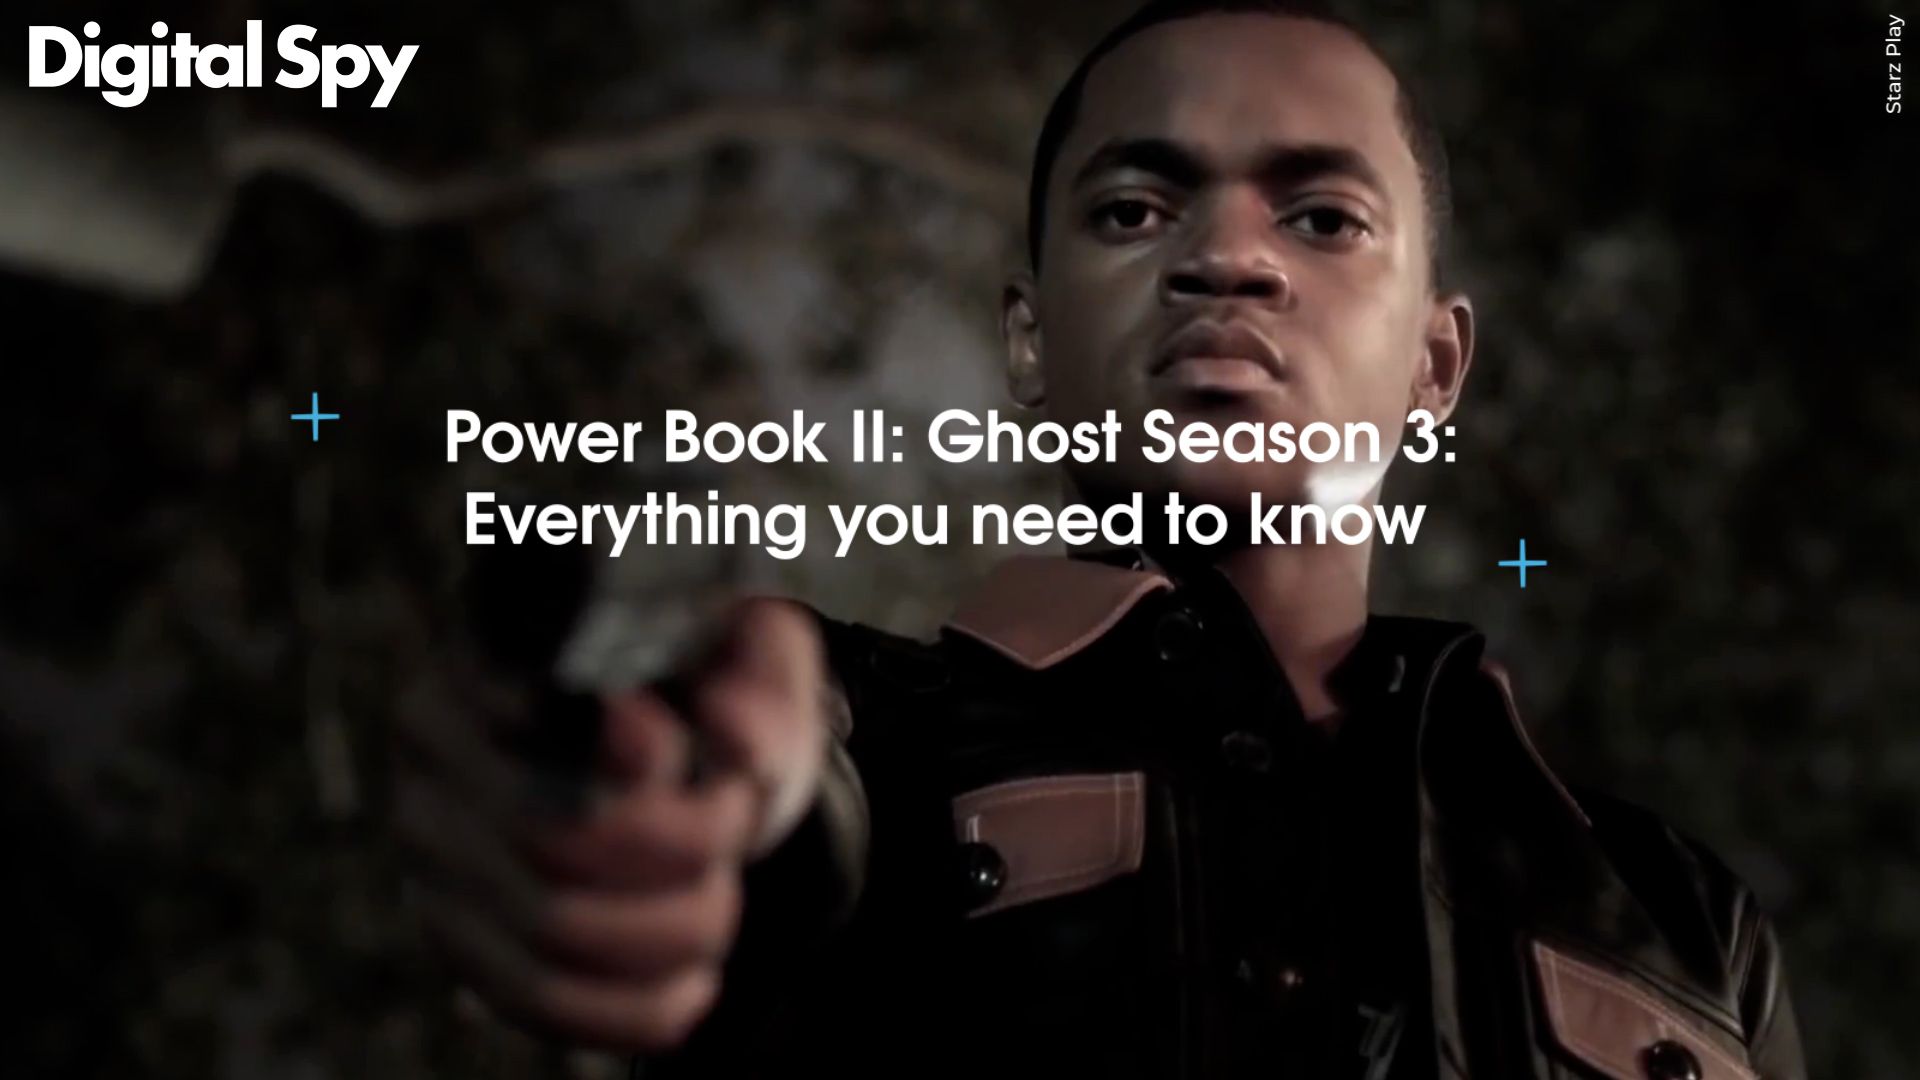 Exclusive: Here's a First Look at 'Power Book II: Ghost' Season 3